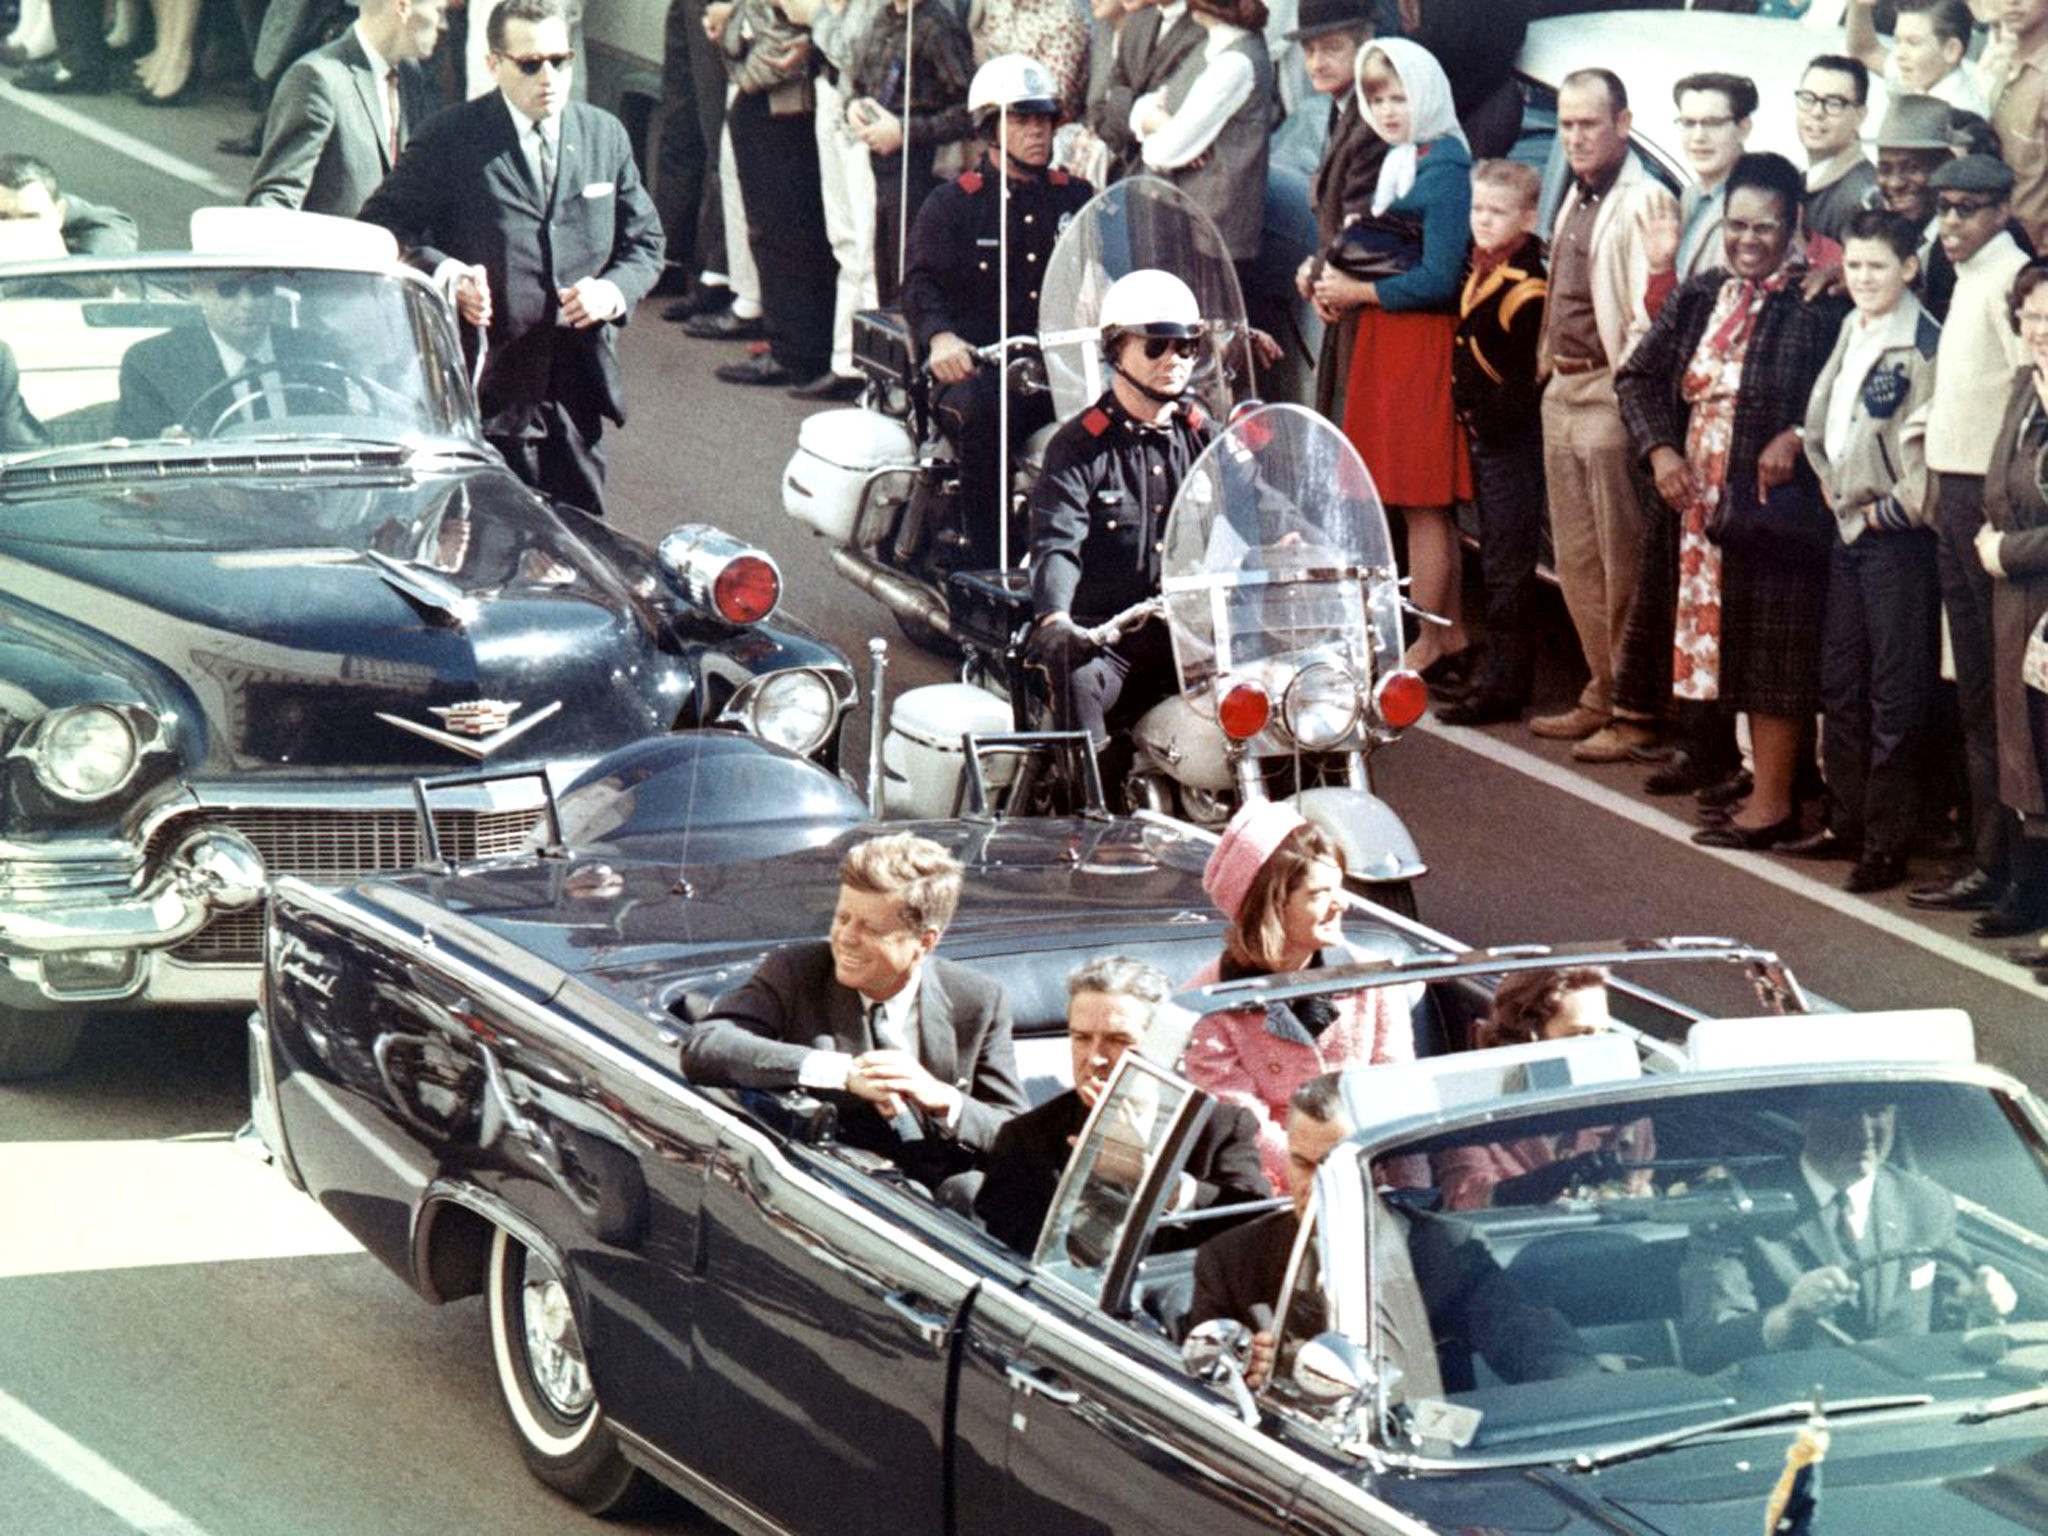 JFK Revisited: Through the Looking Glass: Scene Image 2